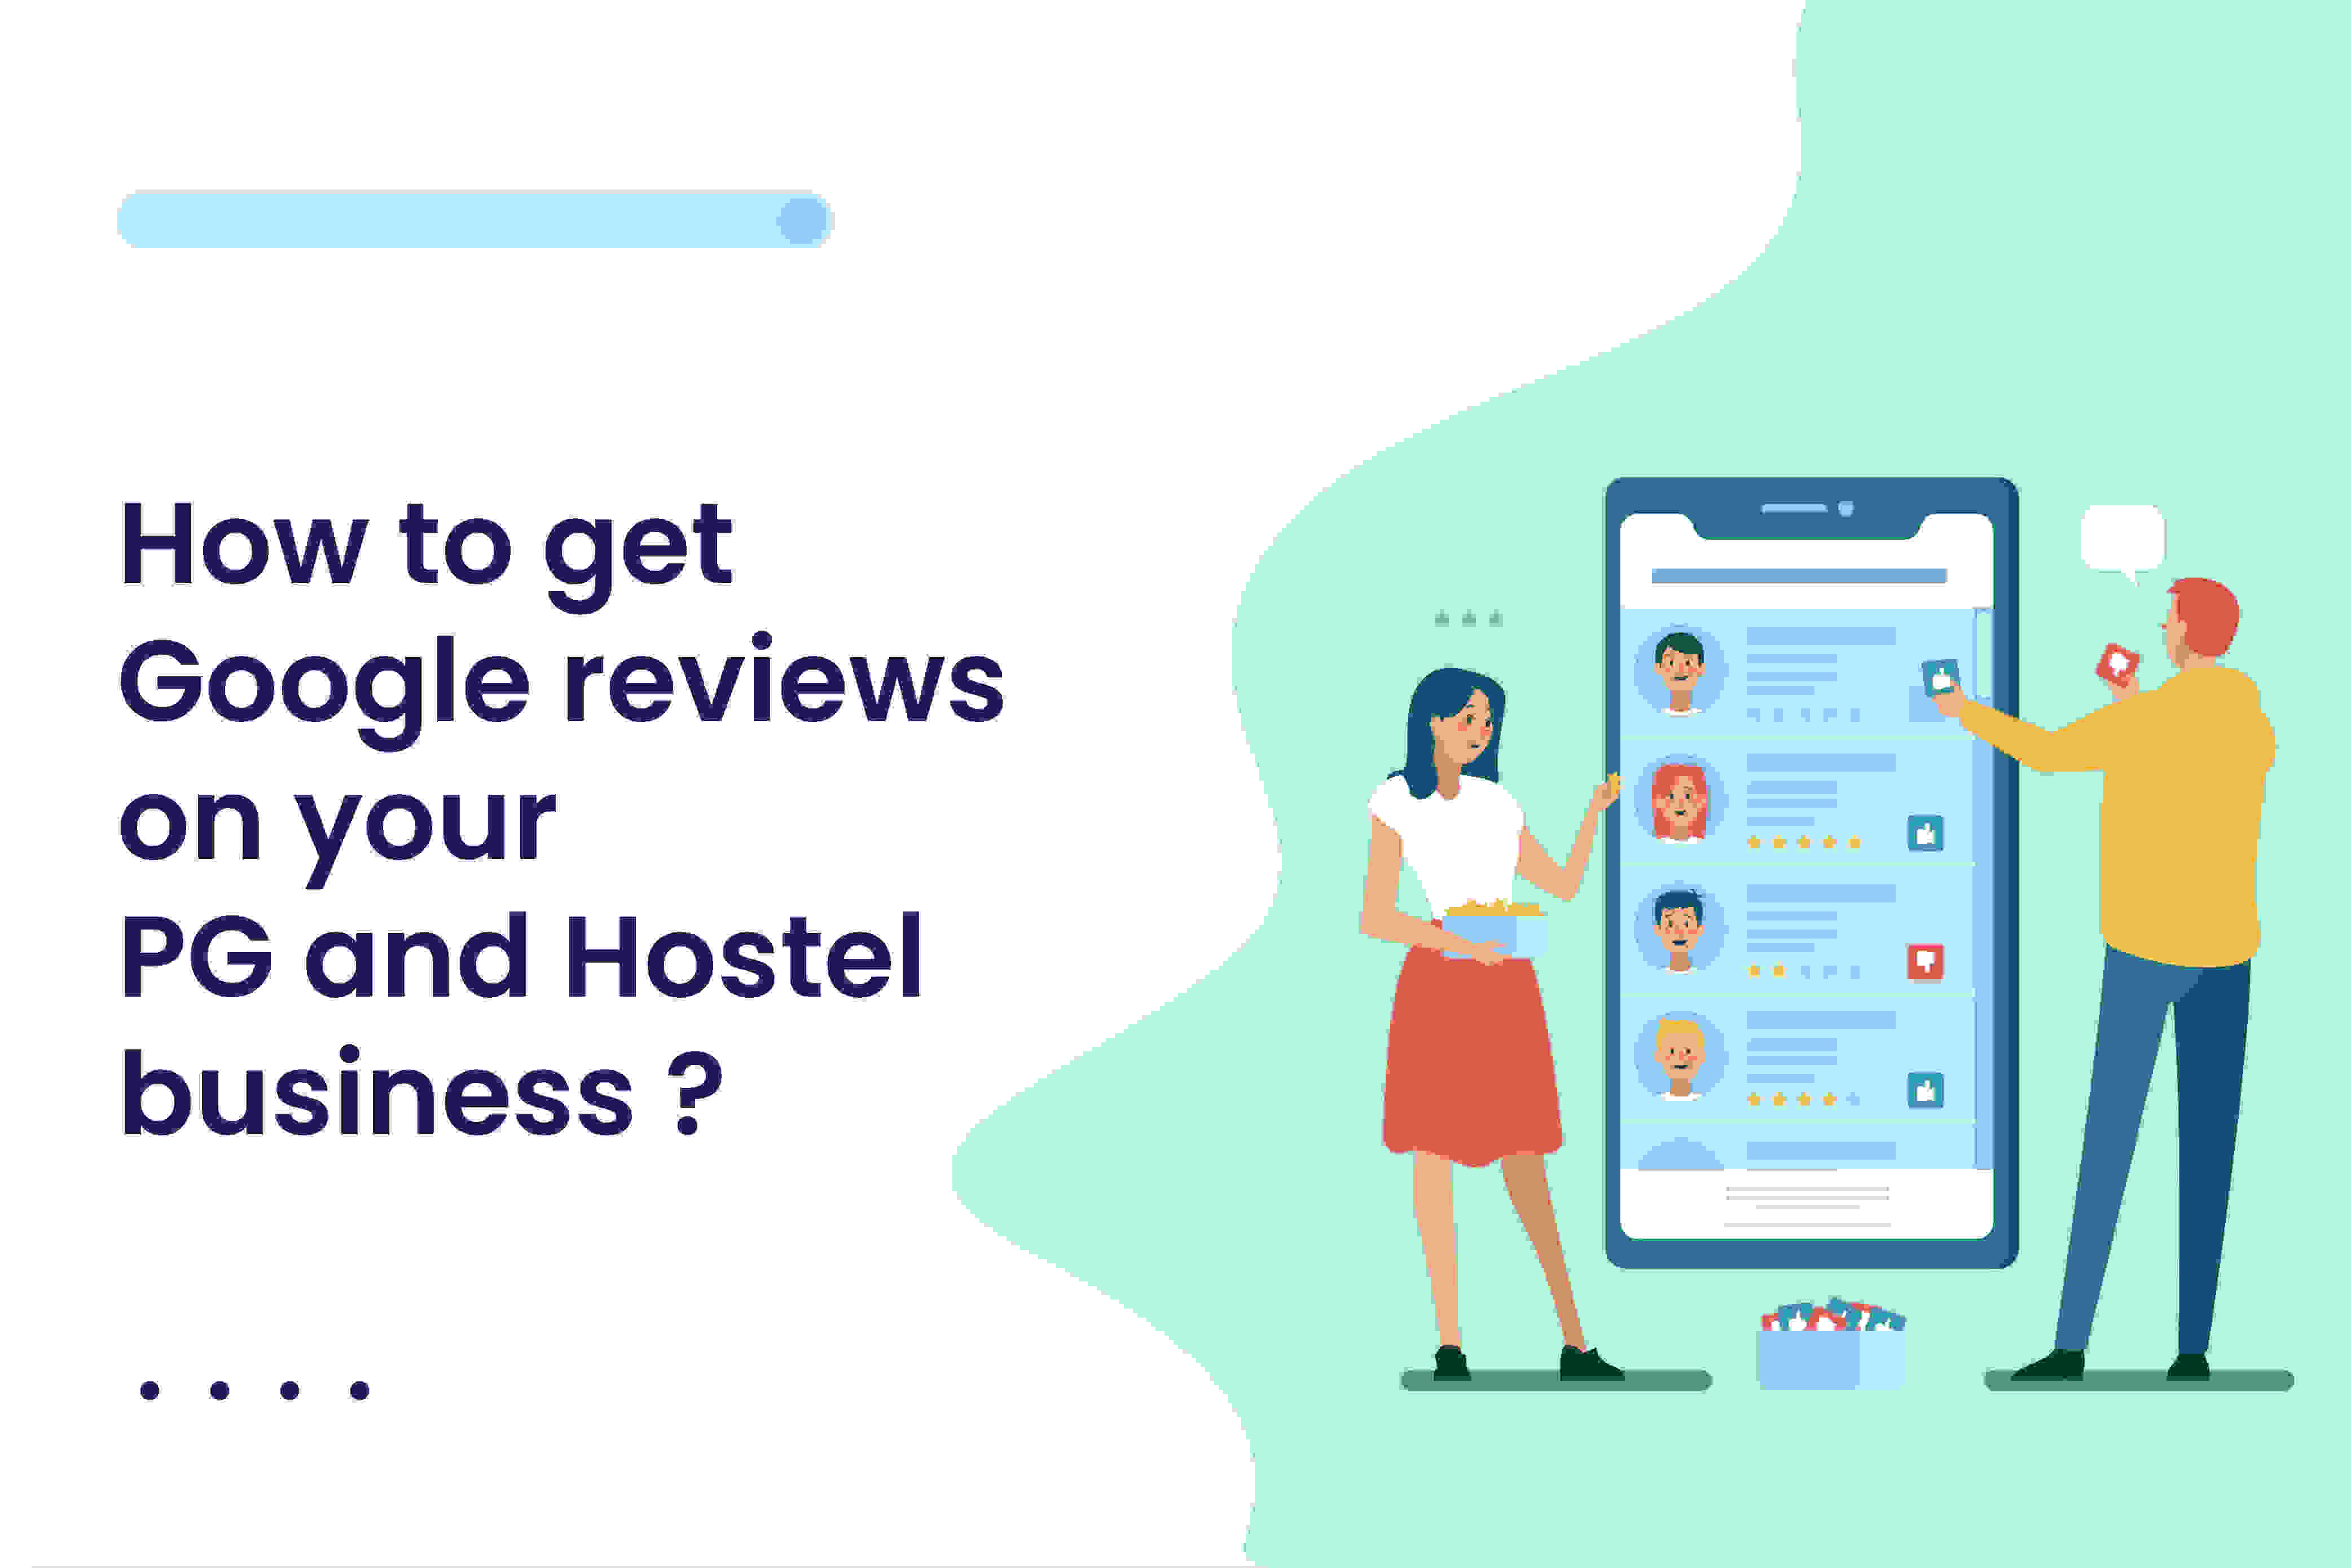 How to get Google reviews on your PG and Hostel business? 